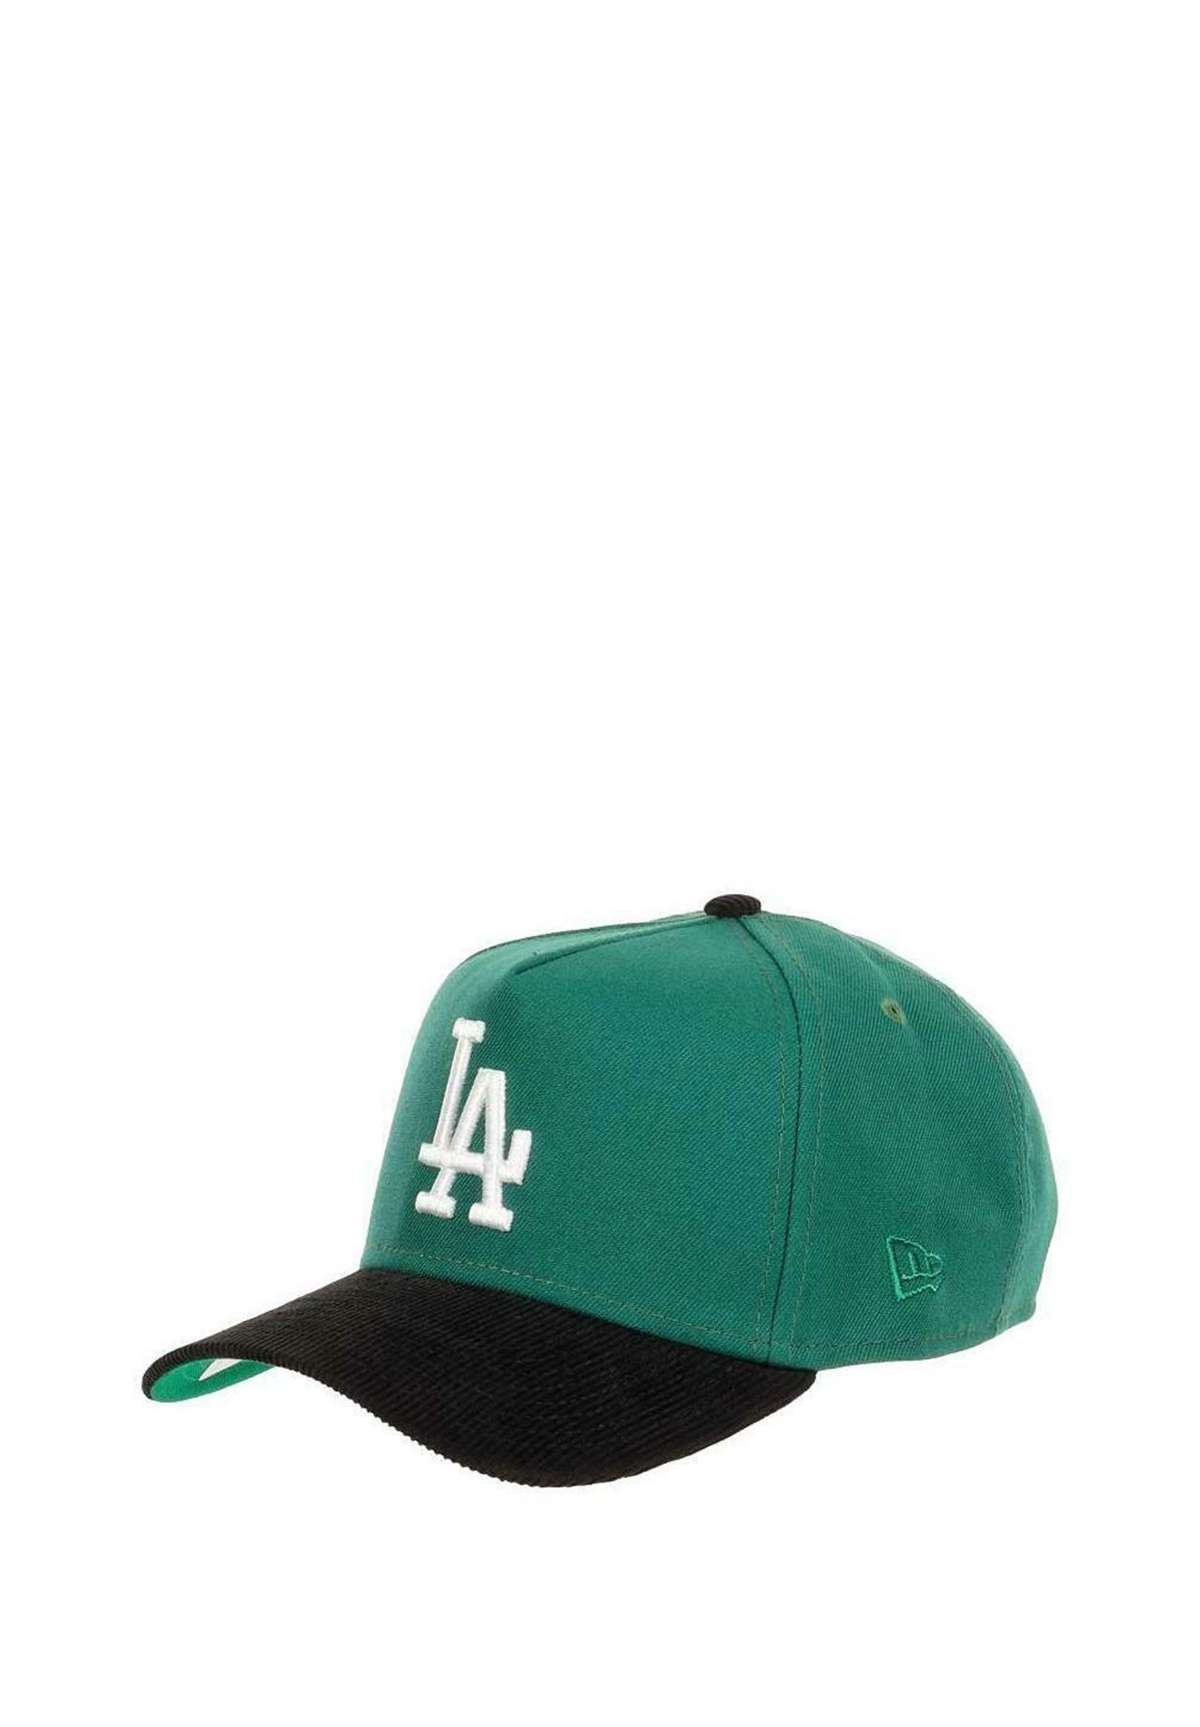 Кепка LOS ANGELES DODGERS MLB WORLD SERIES SIDEPATCH 9FORTY A-FRAME SNAPBACK